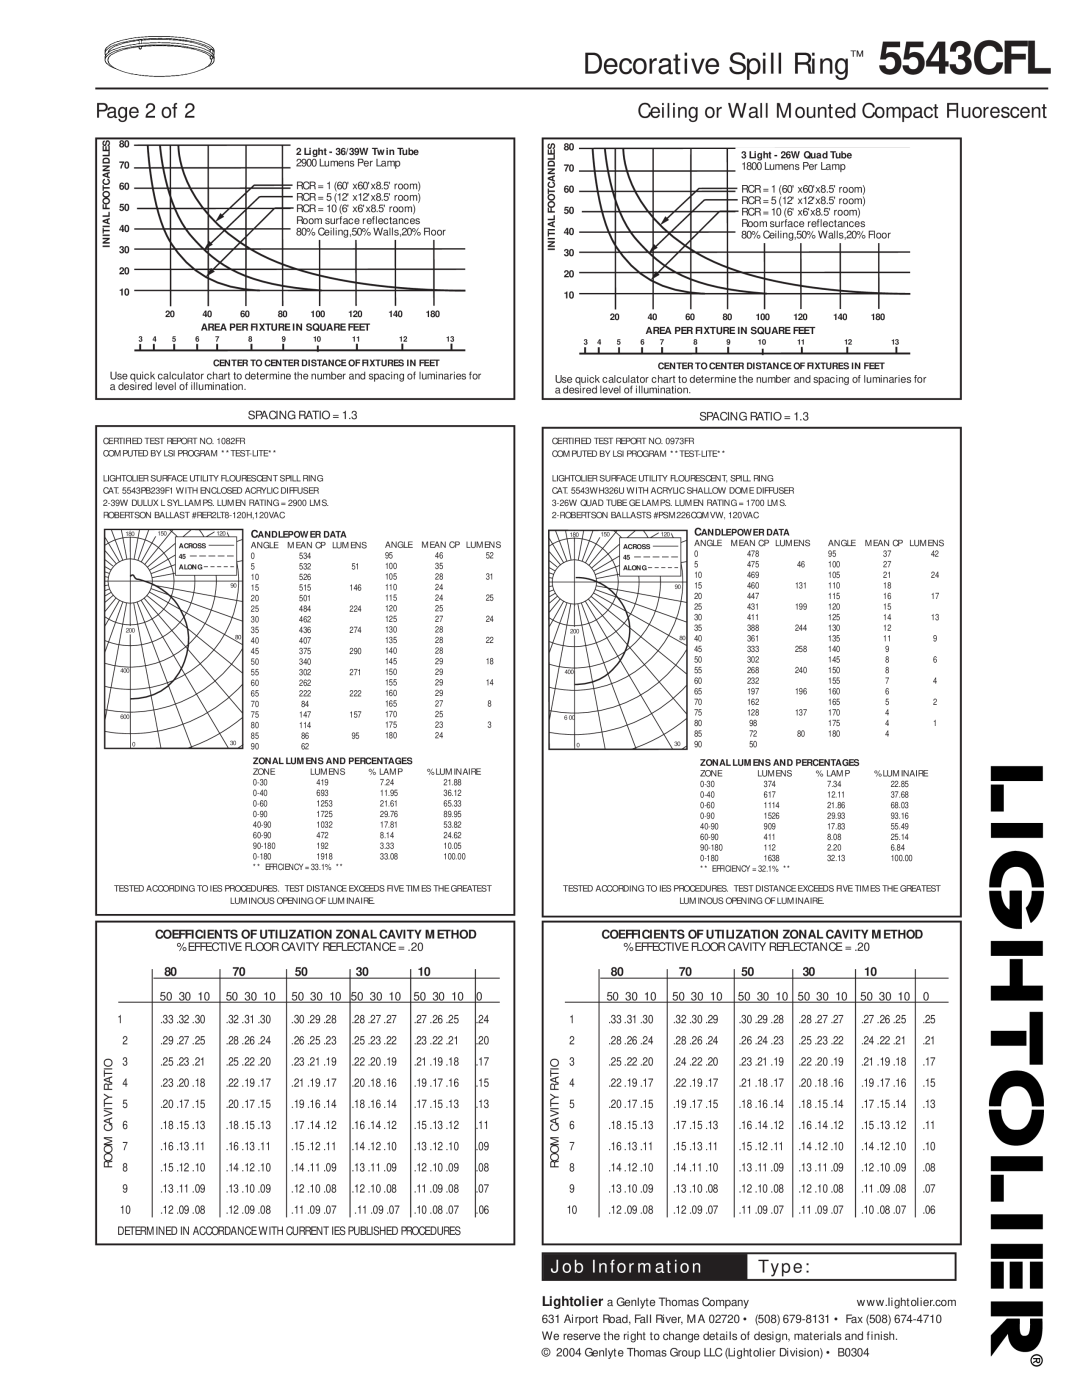 Lightolier Page 2 of, Type, Decorative Spill Ring 5543CFL, Ceiling or Wall Mounted Compact Fluorescent, Job Information 